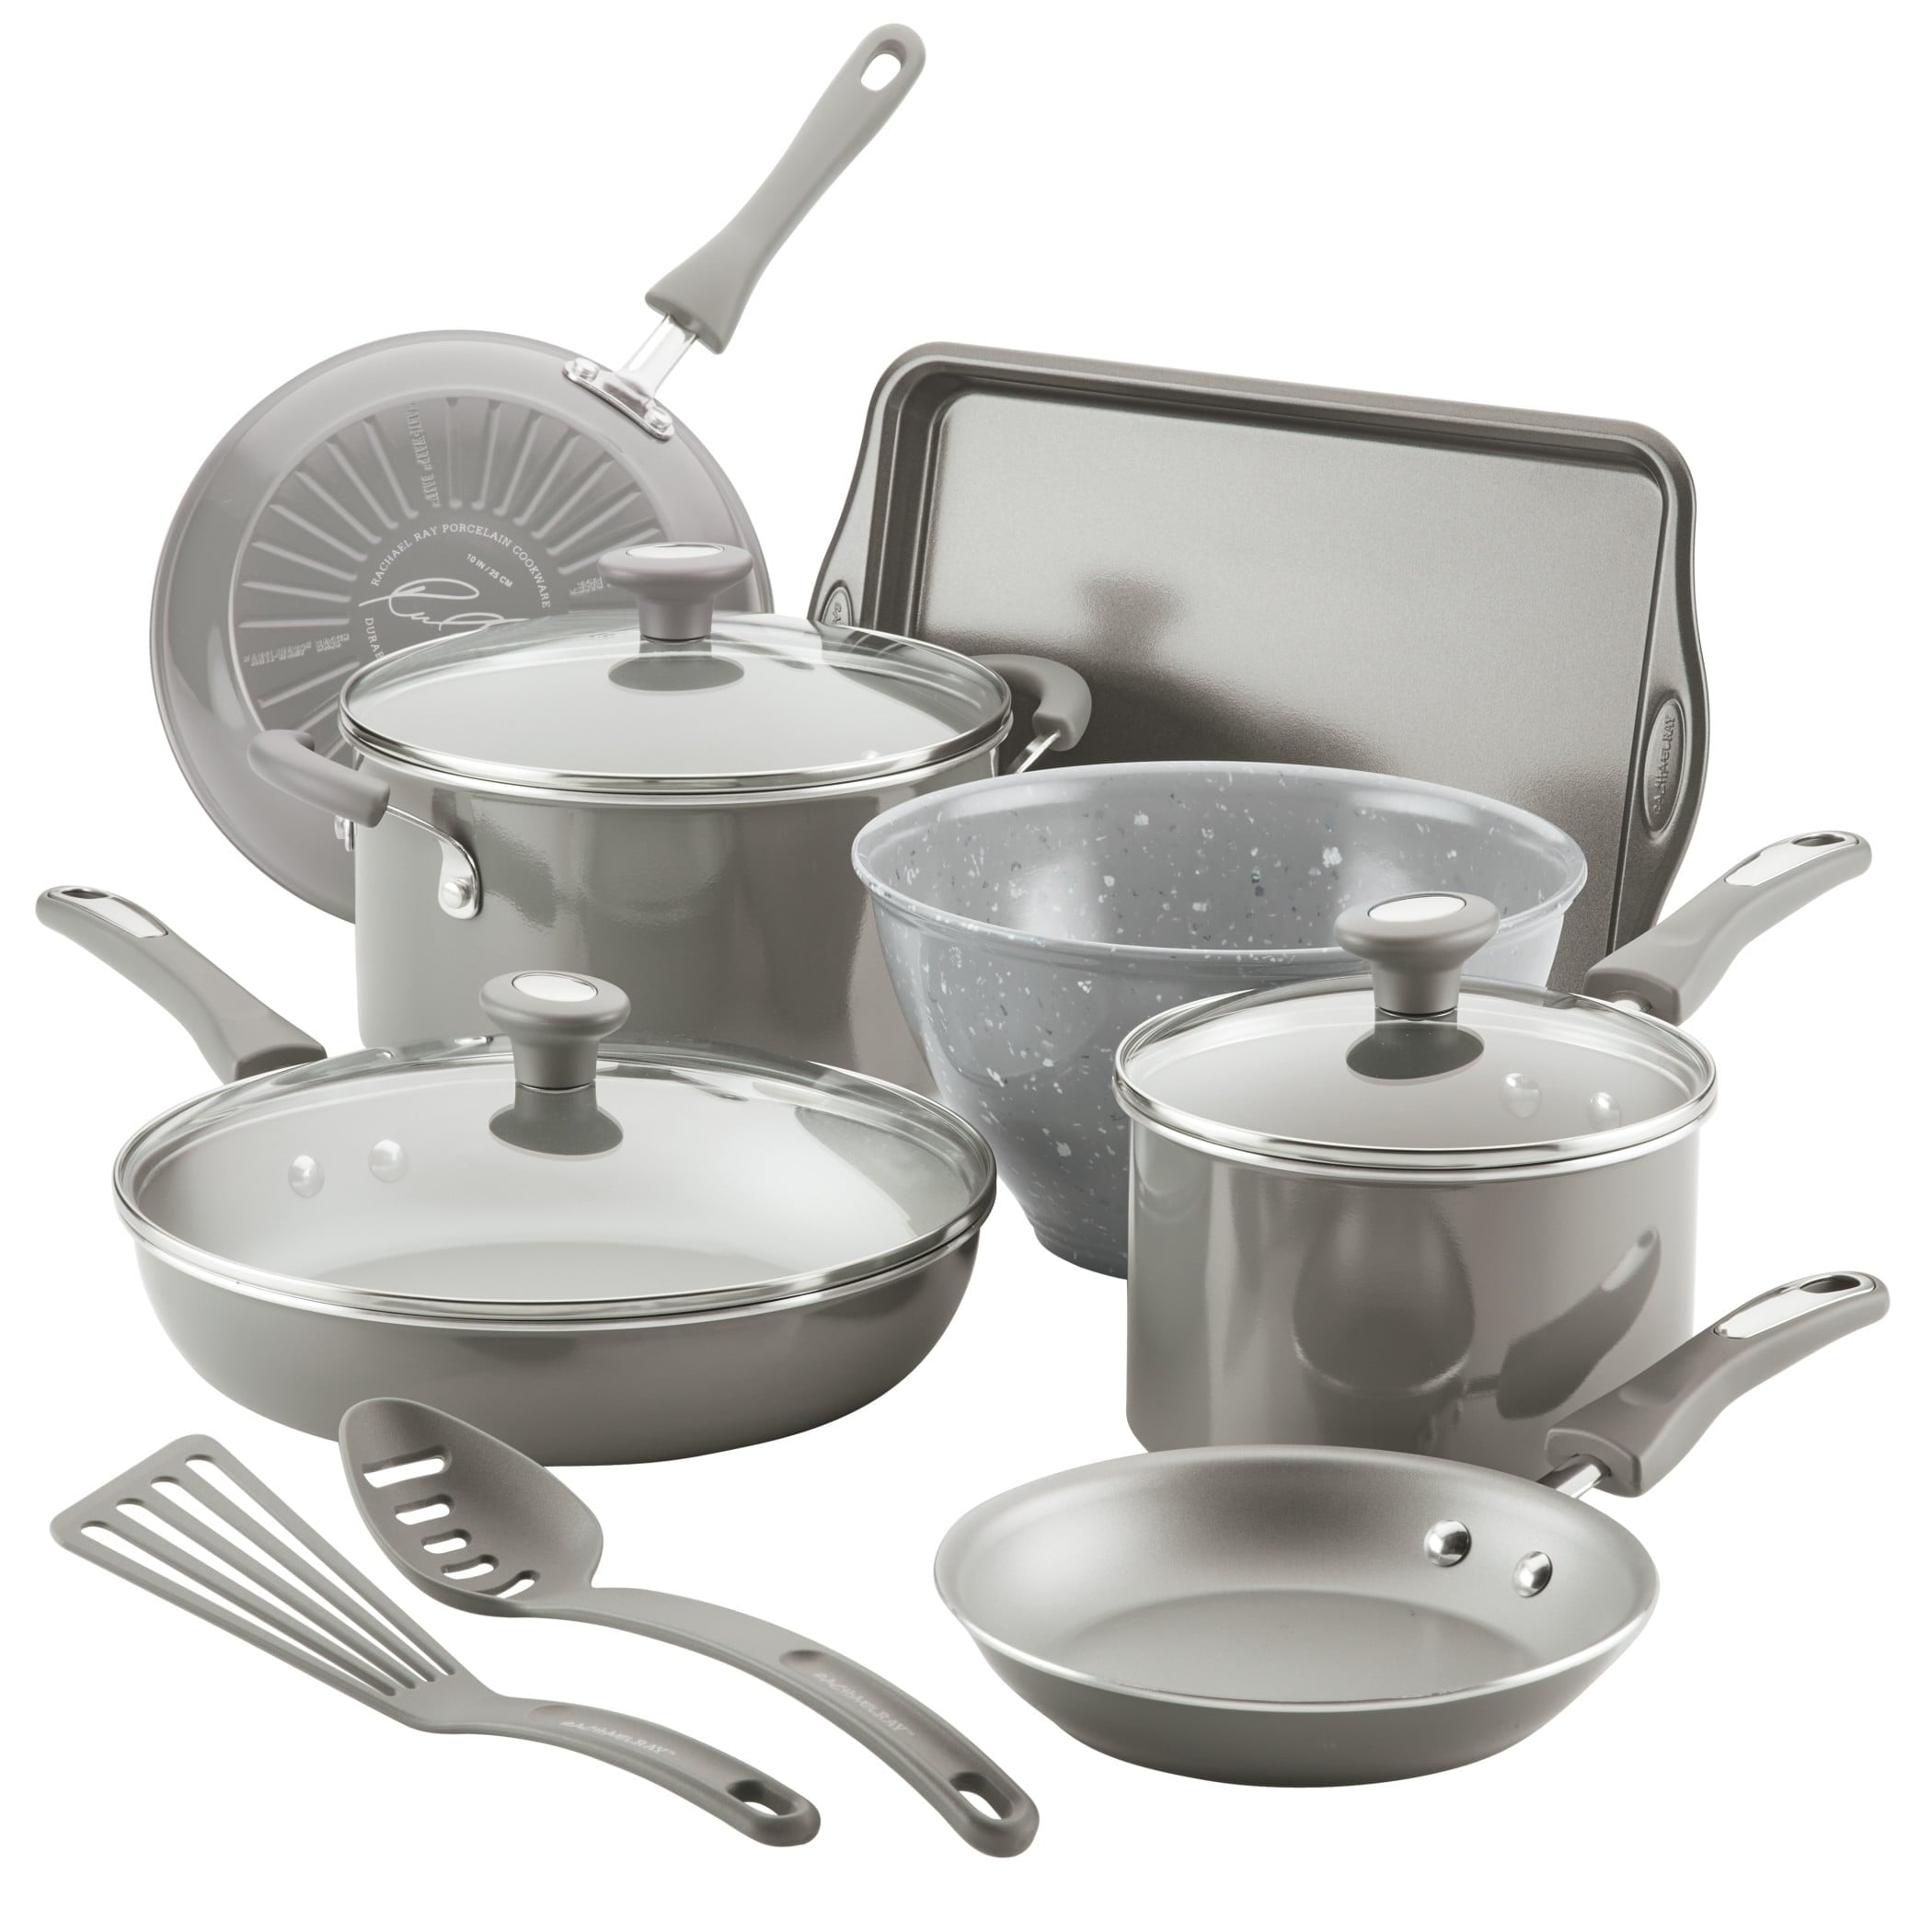 Paula Deen Family's New Hammered Aluminum Forged Silver 14pc